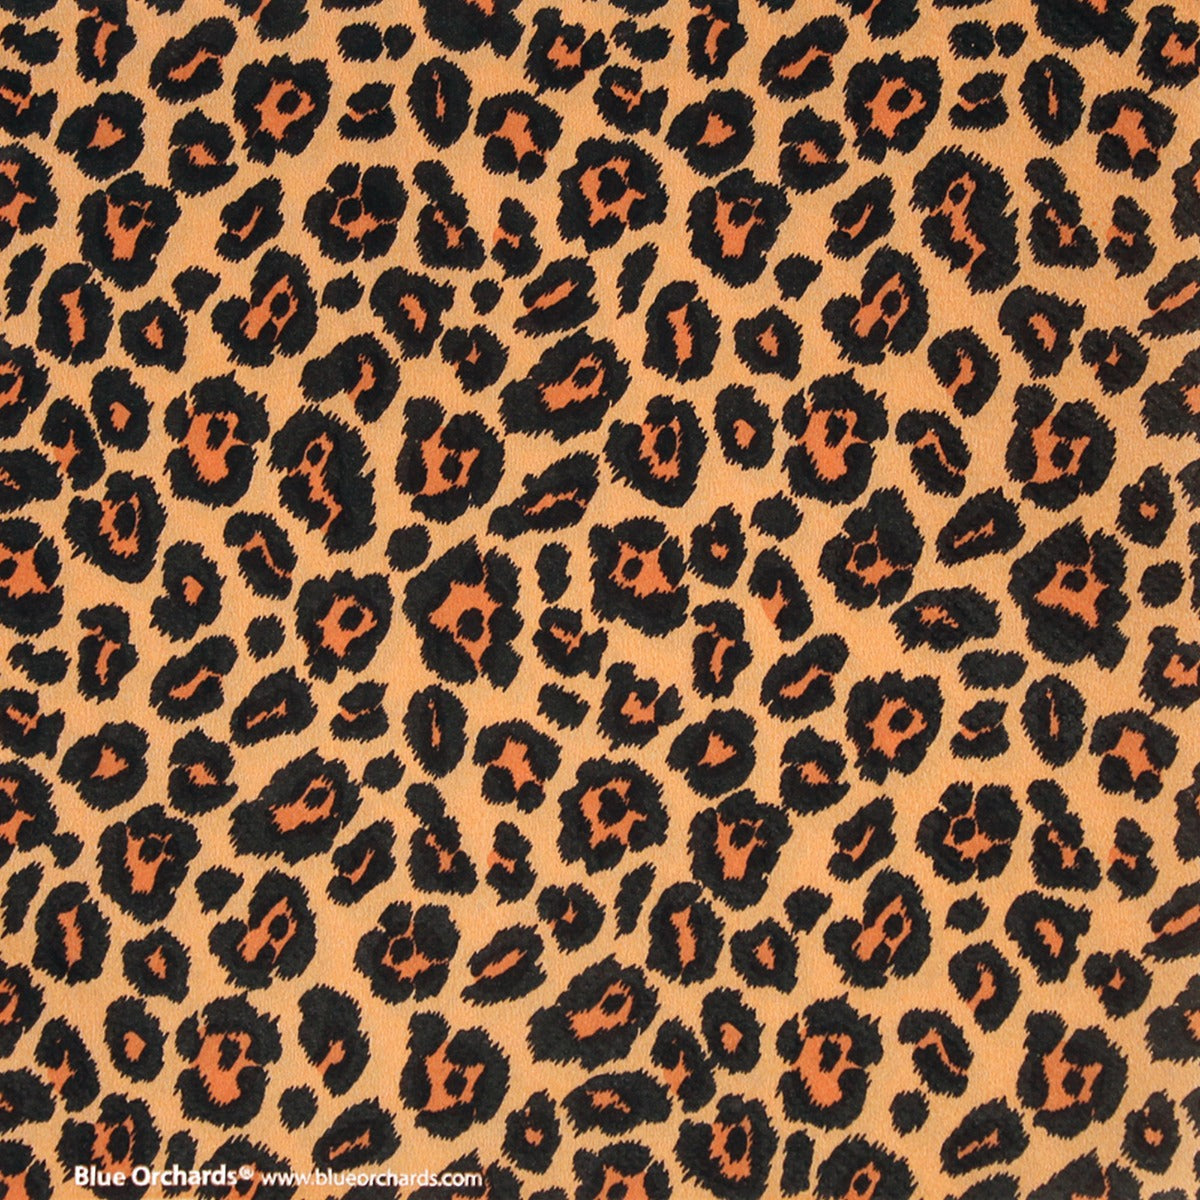 Leopard print paper lunch napkin, a stylish and practical addition to any table setting or party.